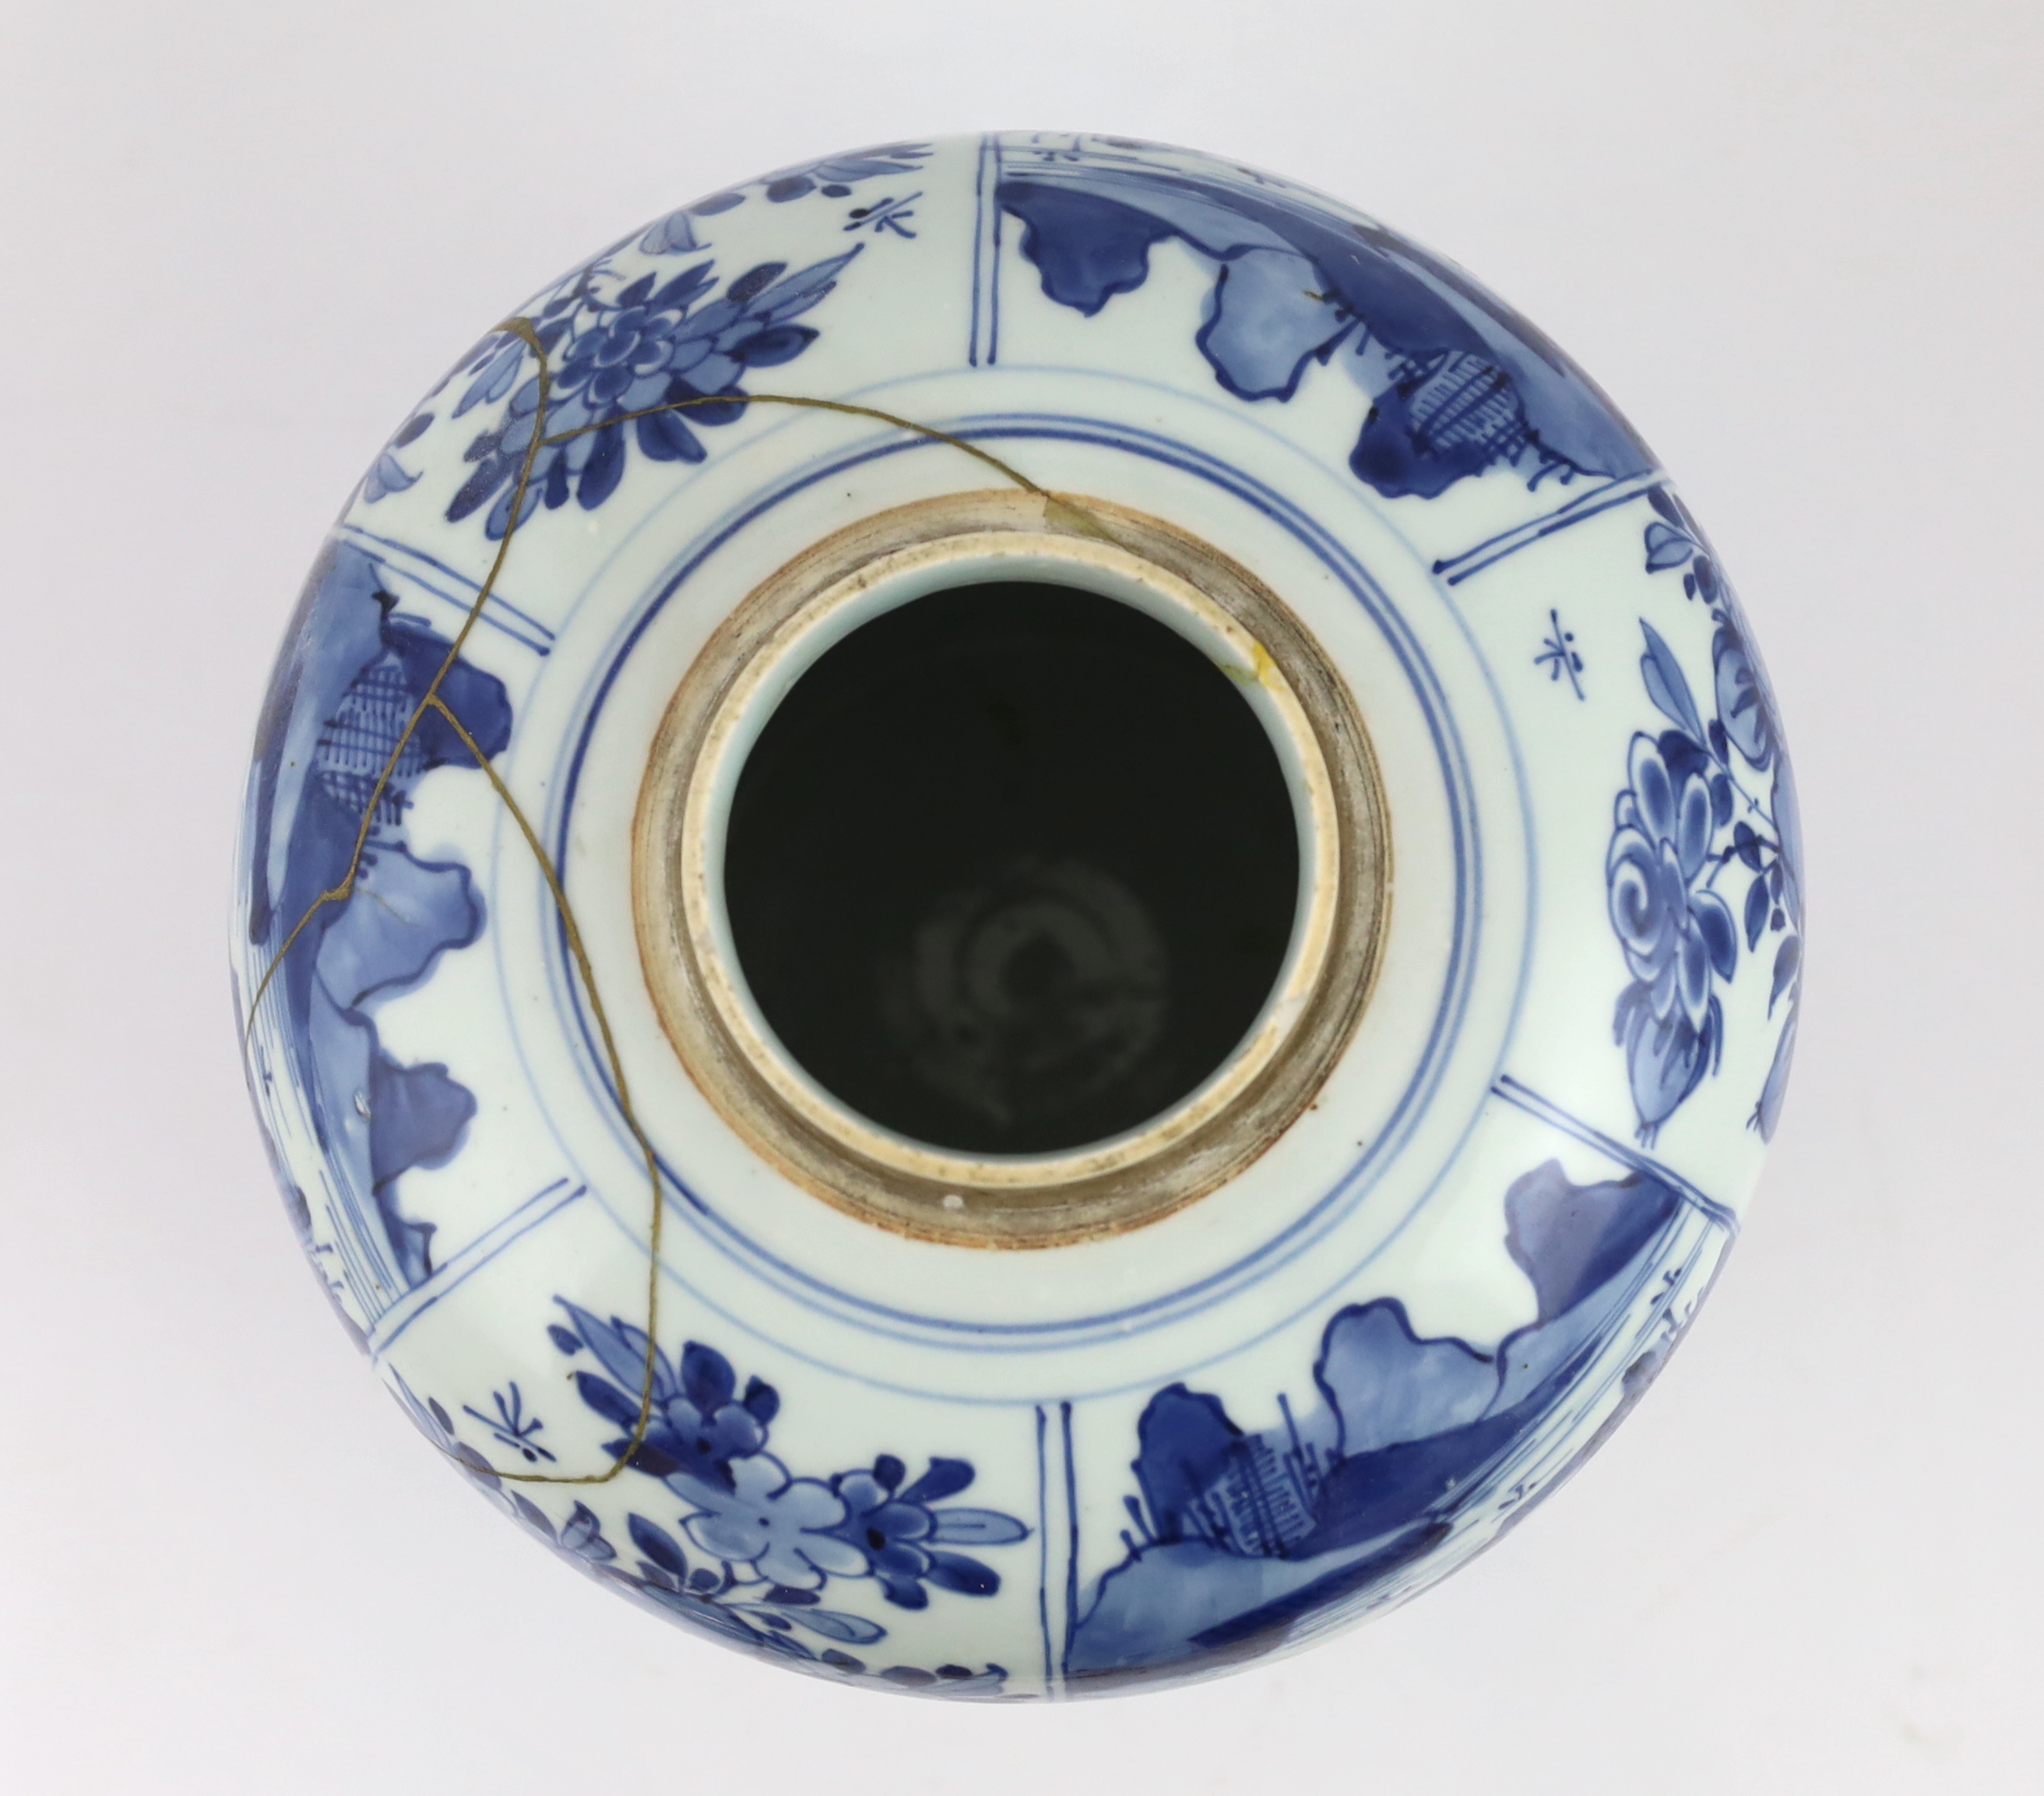 A Chinese blue and white ovoid jar and cover, Kangxi period, broken with kintsugi repair